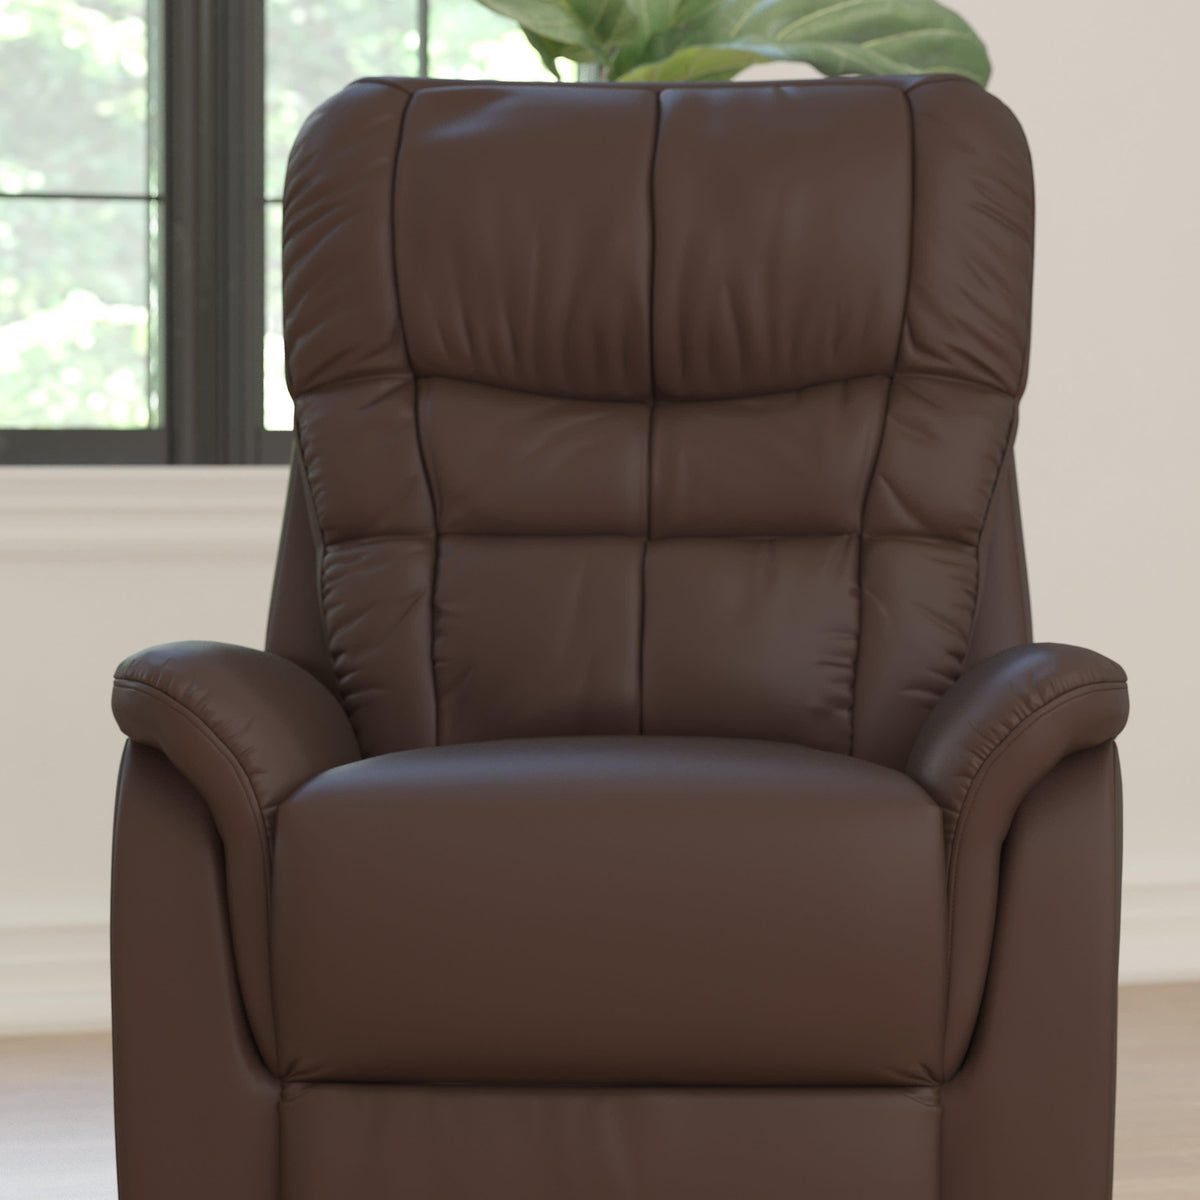 Cognac LeatherSoft |#| Cognac LeatherSoft Remote Powered Lift Recliner for Elderly - Medical Furniture